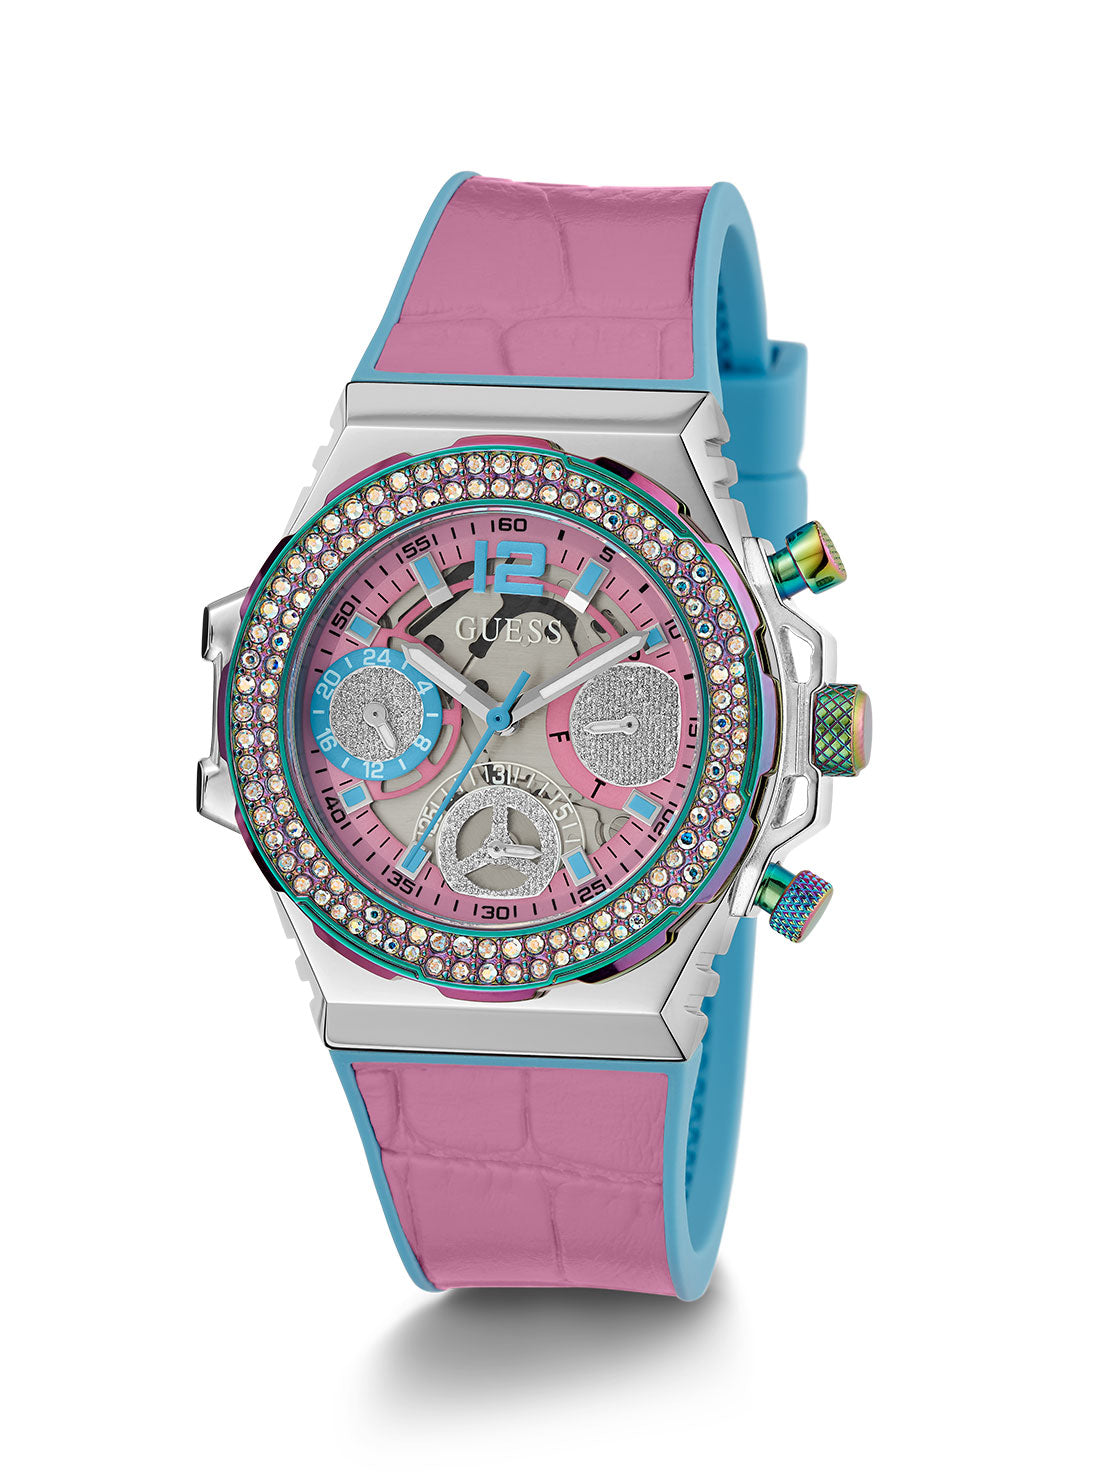 GUESS Women's Pink Turquoise Fusion Silicone Watch GW0553L5 Full View